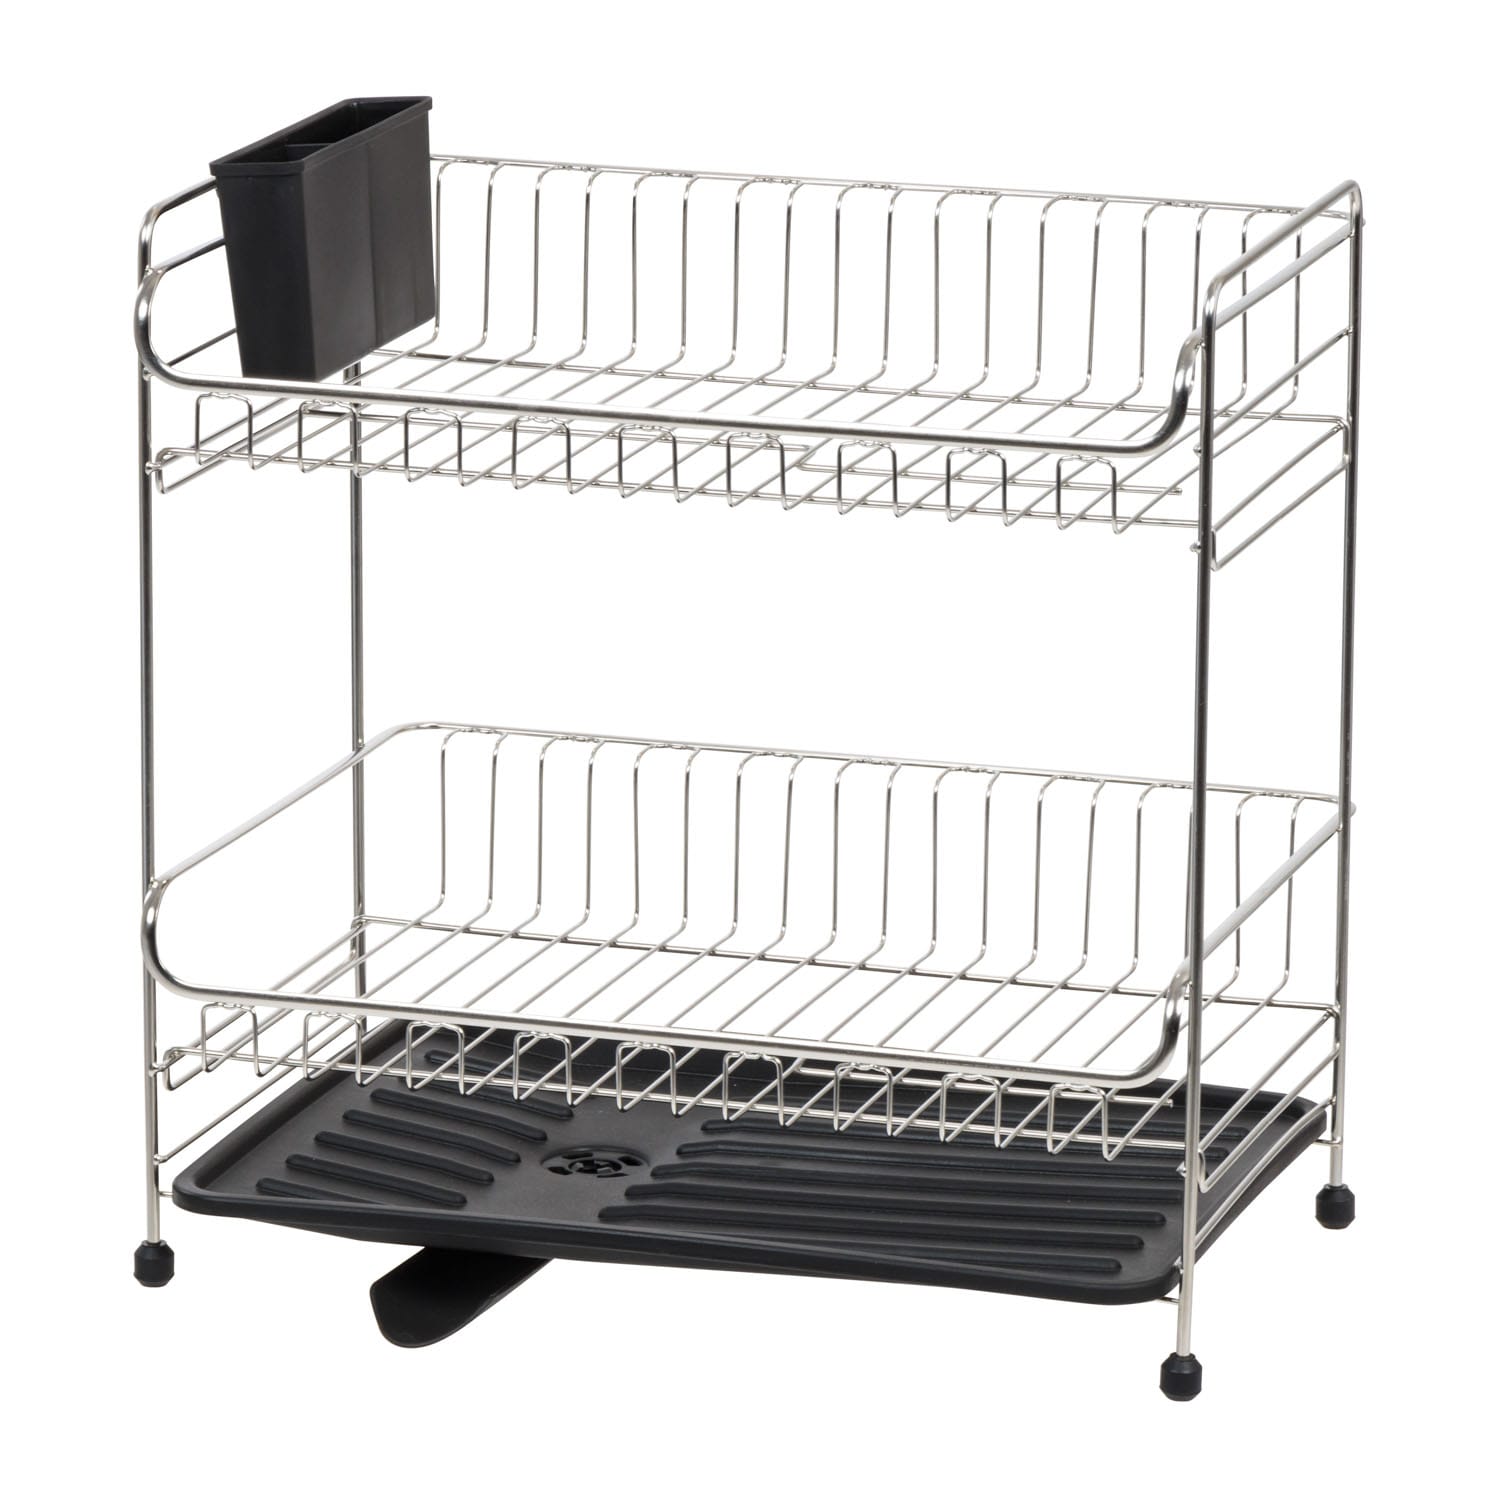 Find more Sterilite Large Dish Drying Rack for sale at up to 90% off